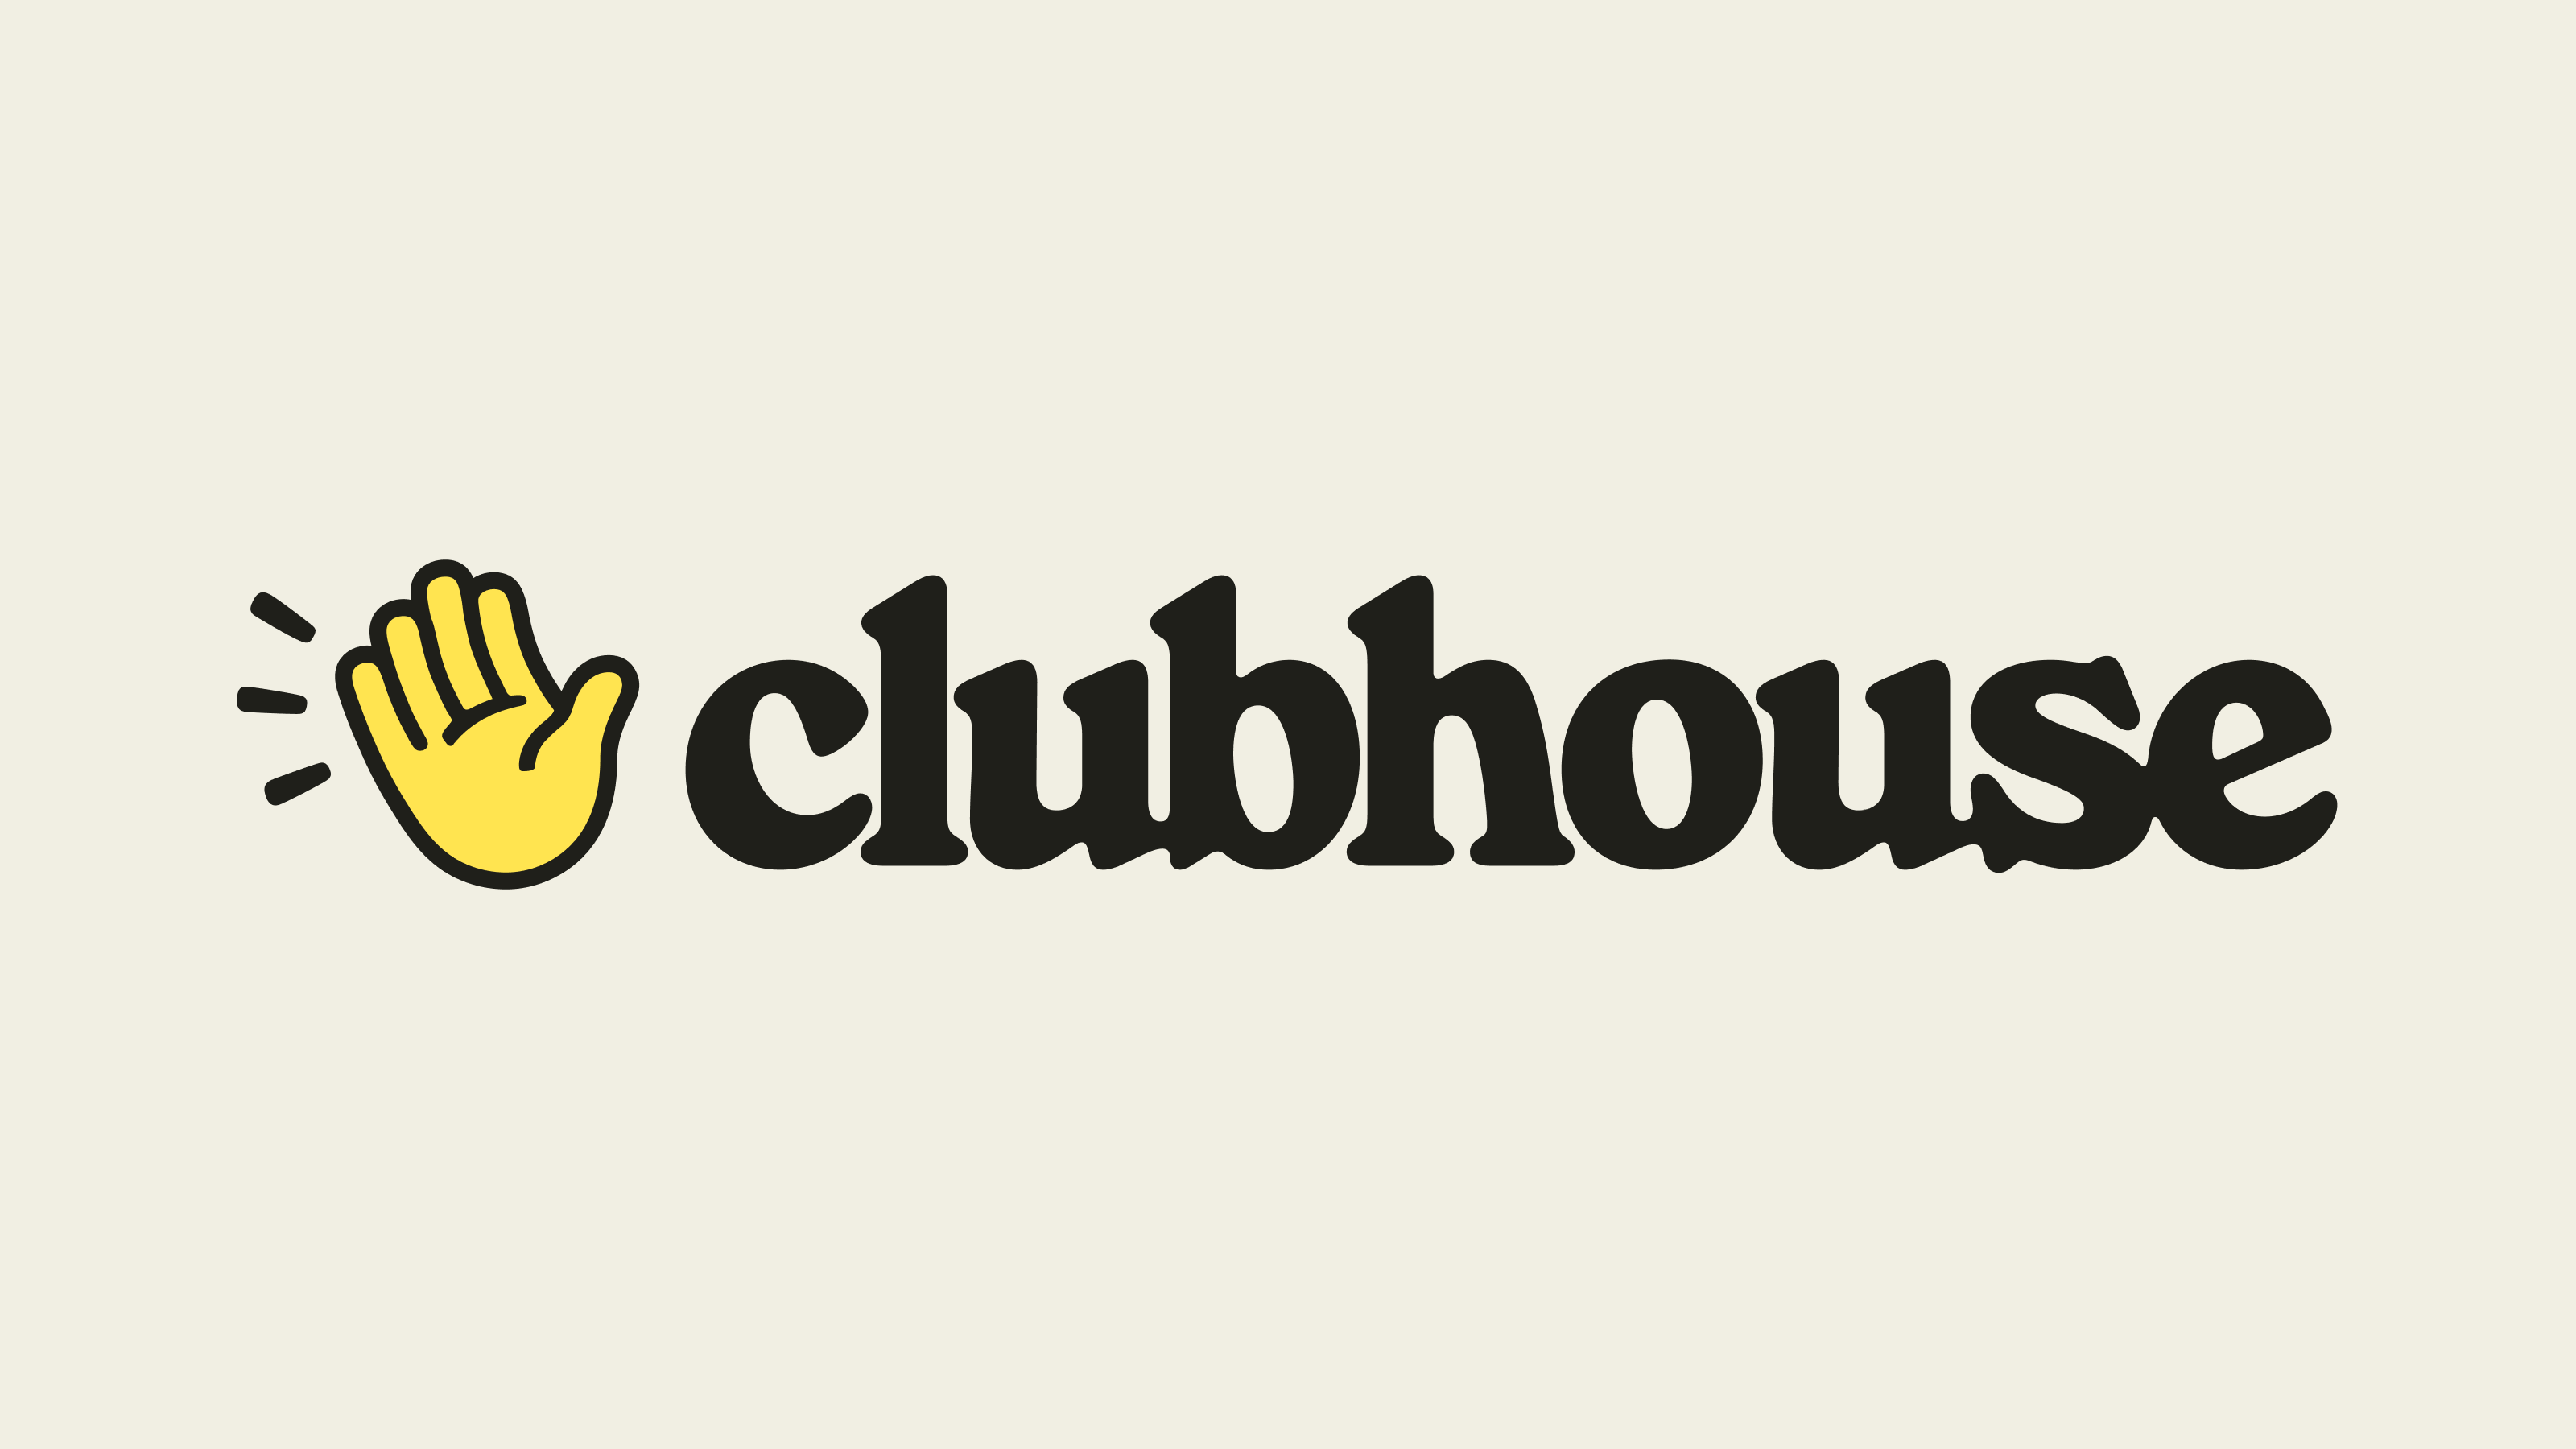 Have you got your invite to the clubhouse